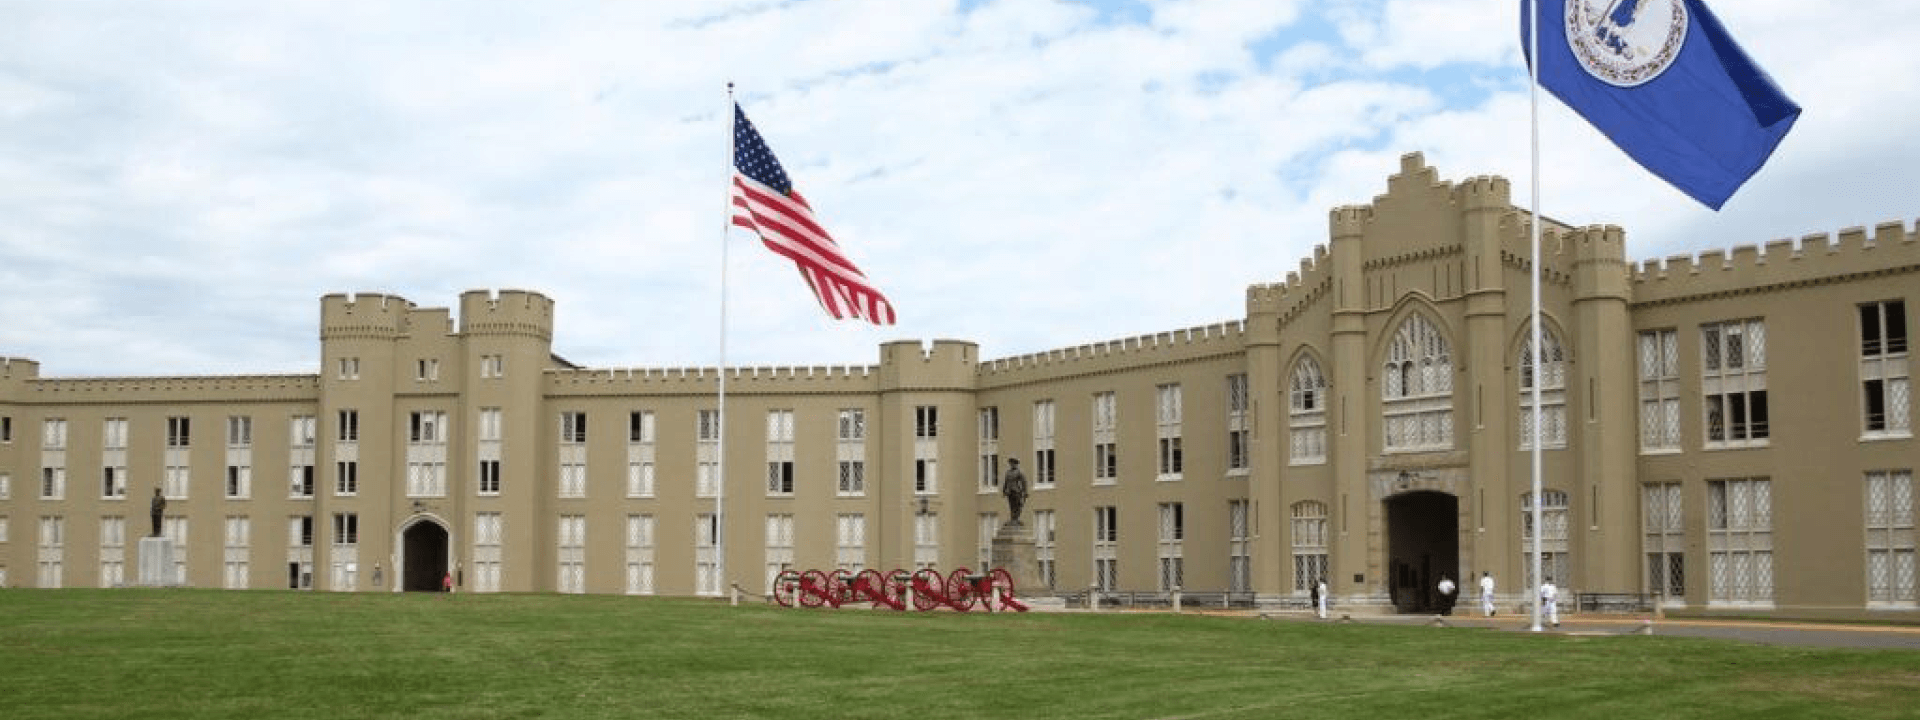 Women's Track and Field - Virginia Military Institute